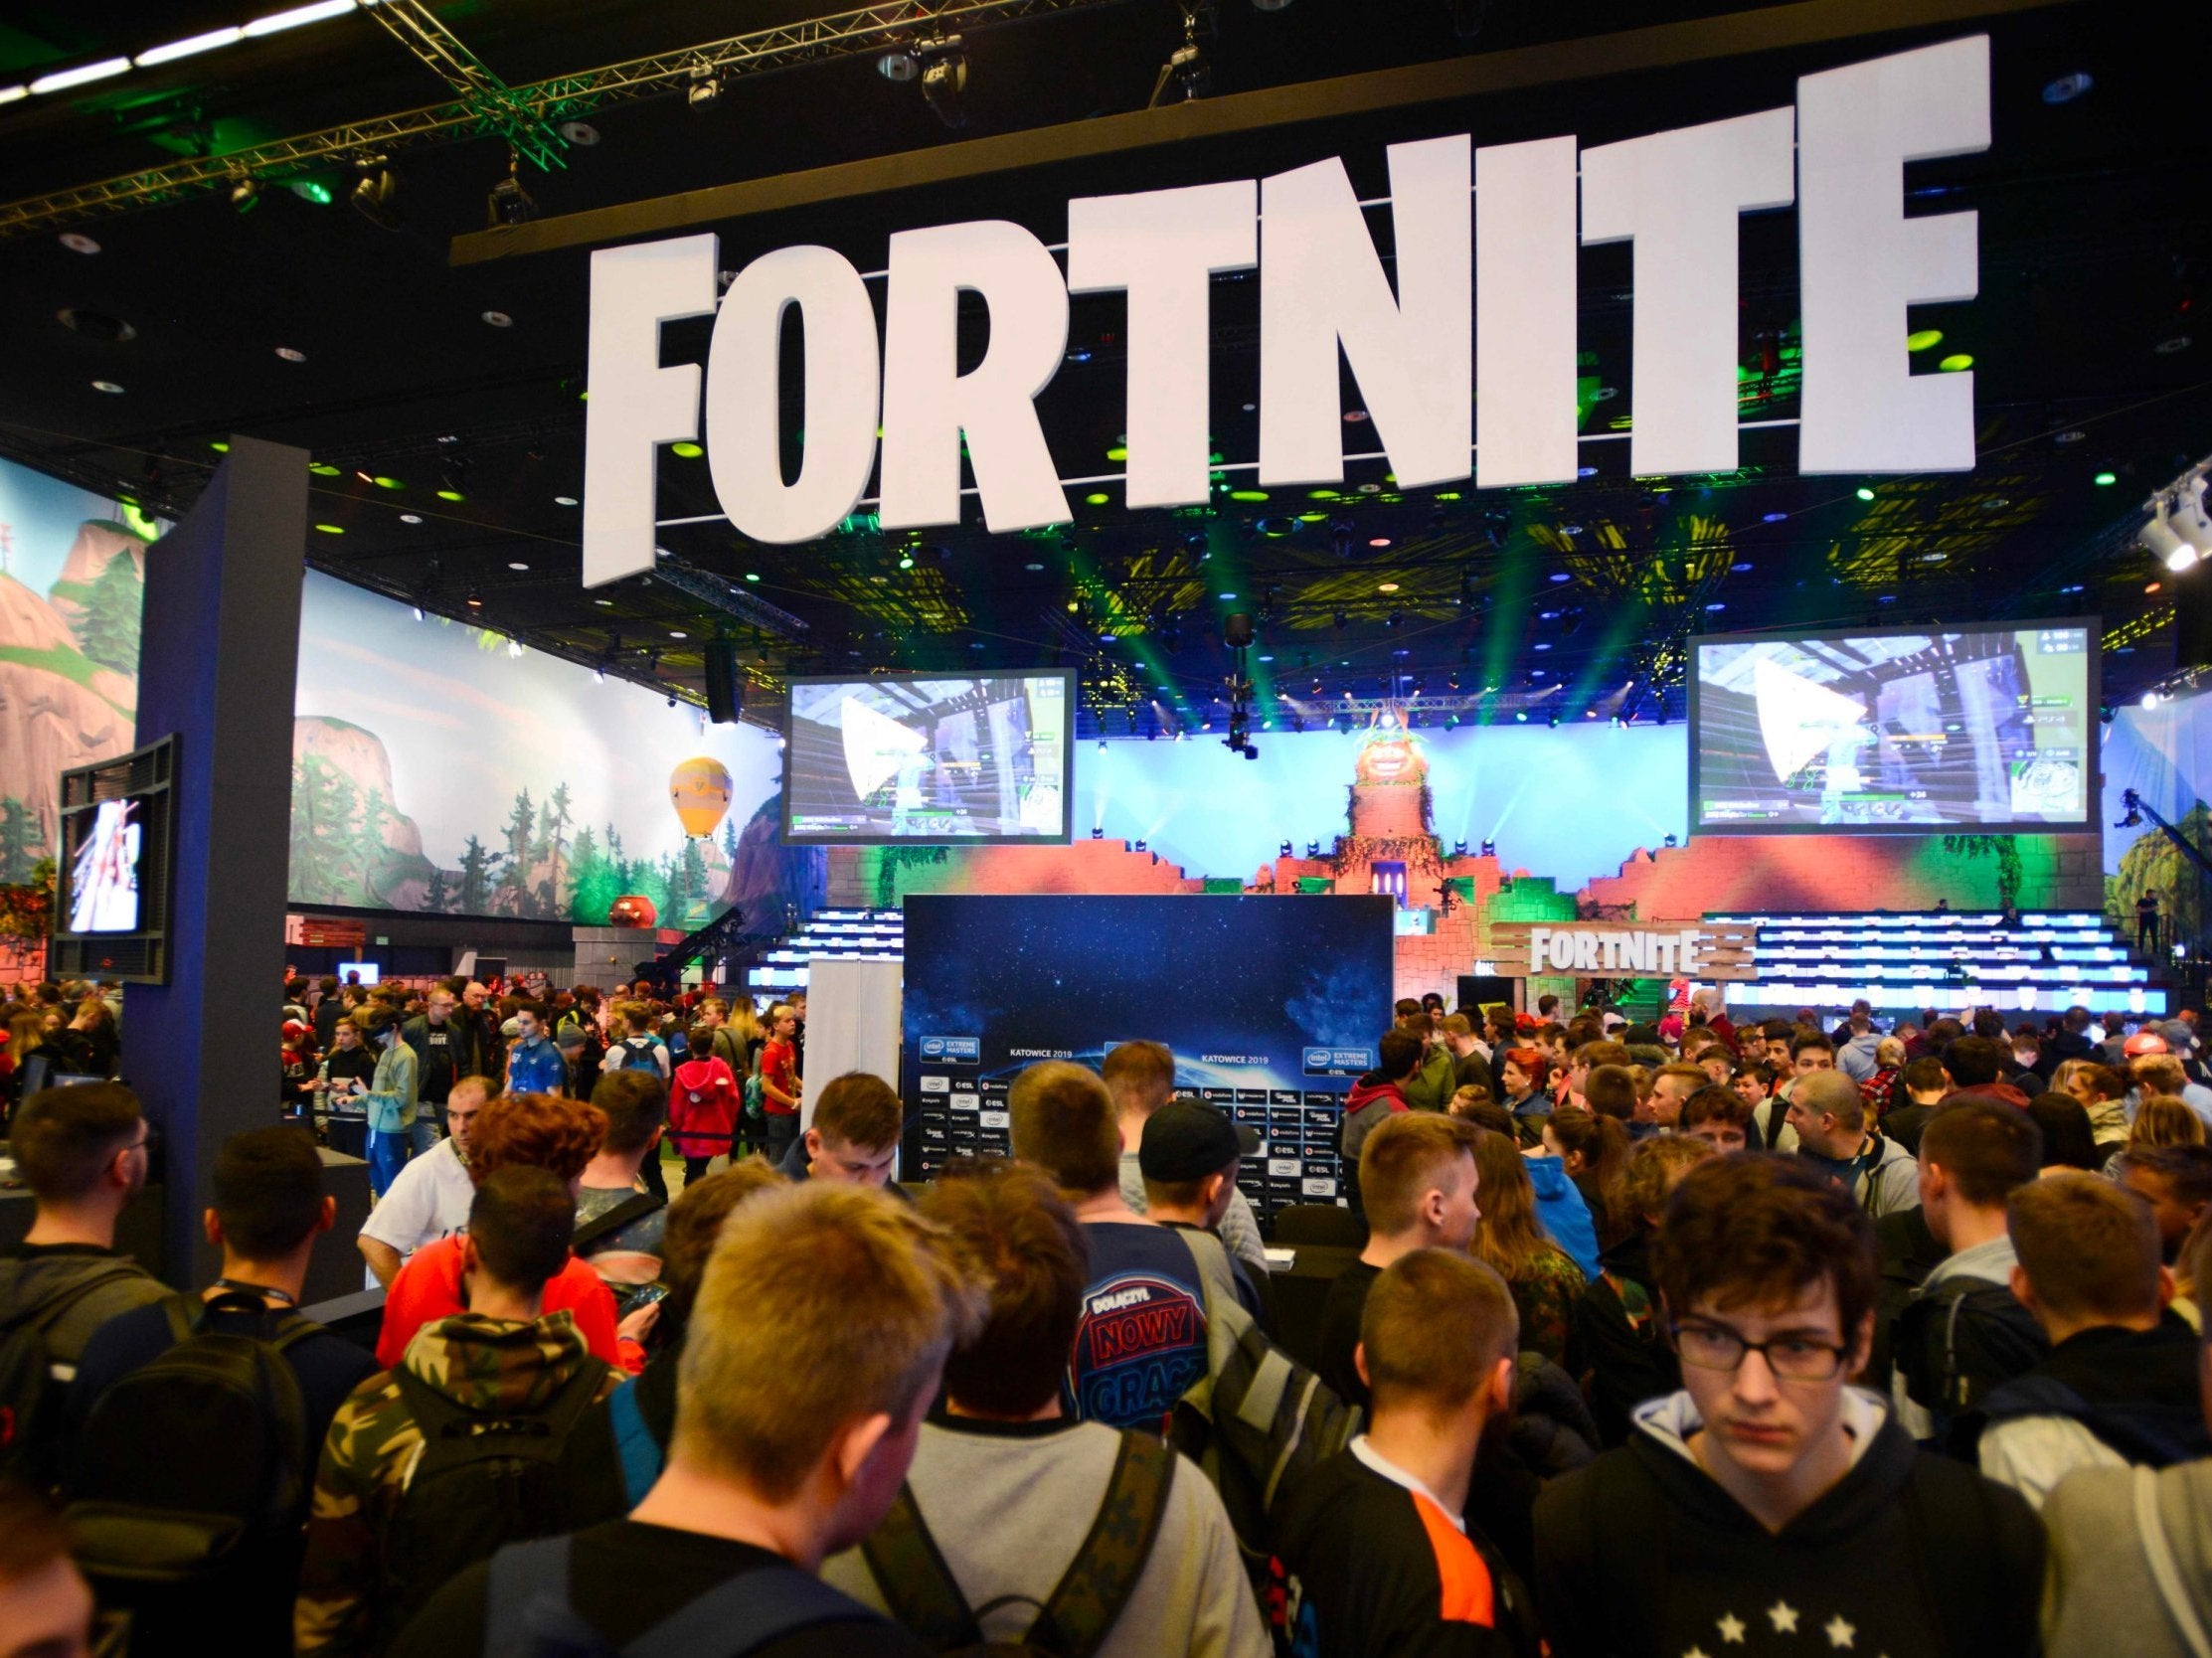 fortnite employees work 100 hour weeks to keep game a success - fortnite banned in uk on thursday